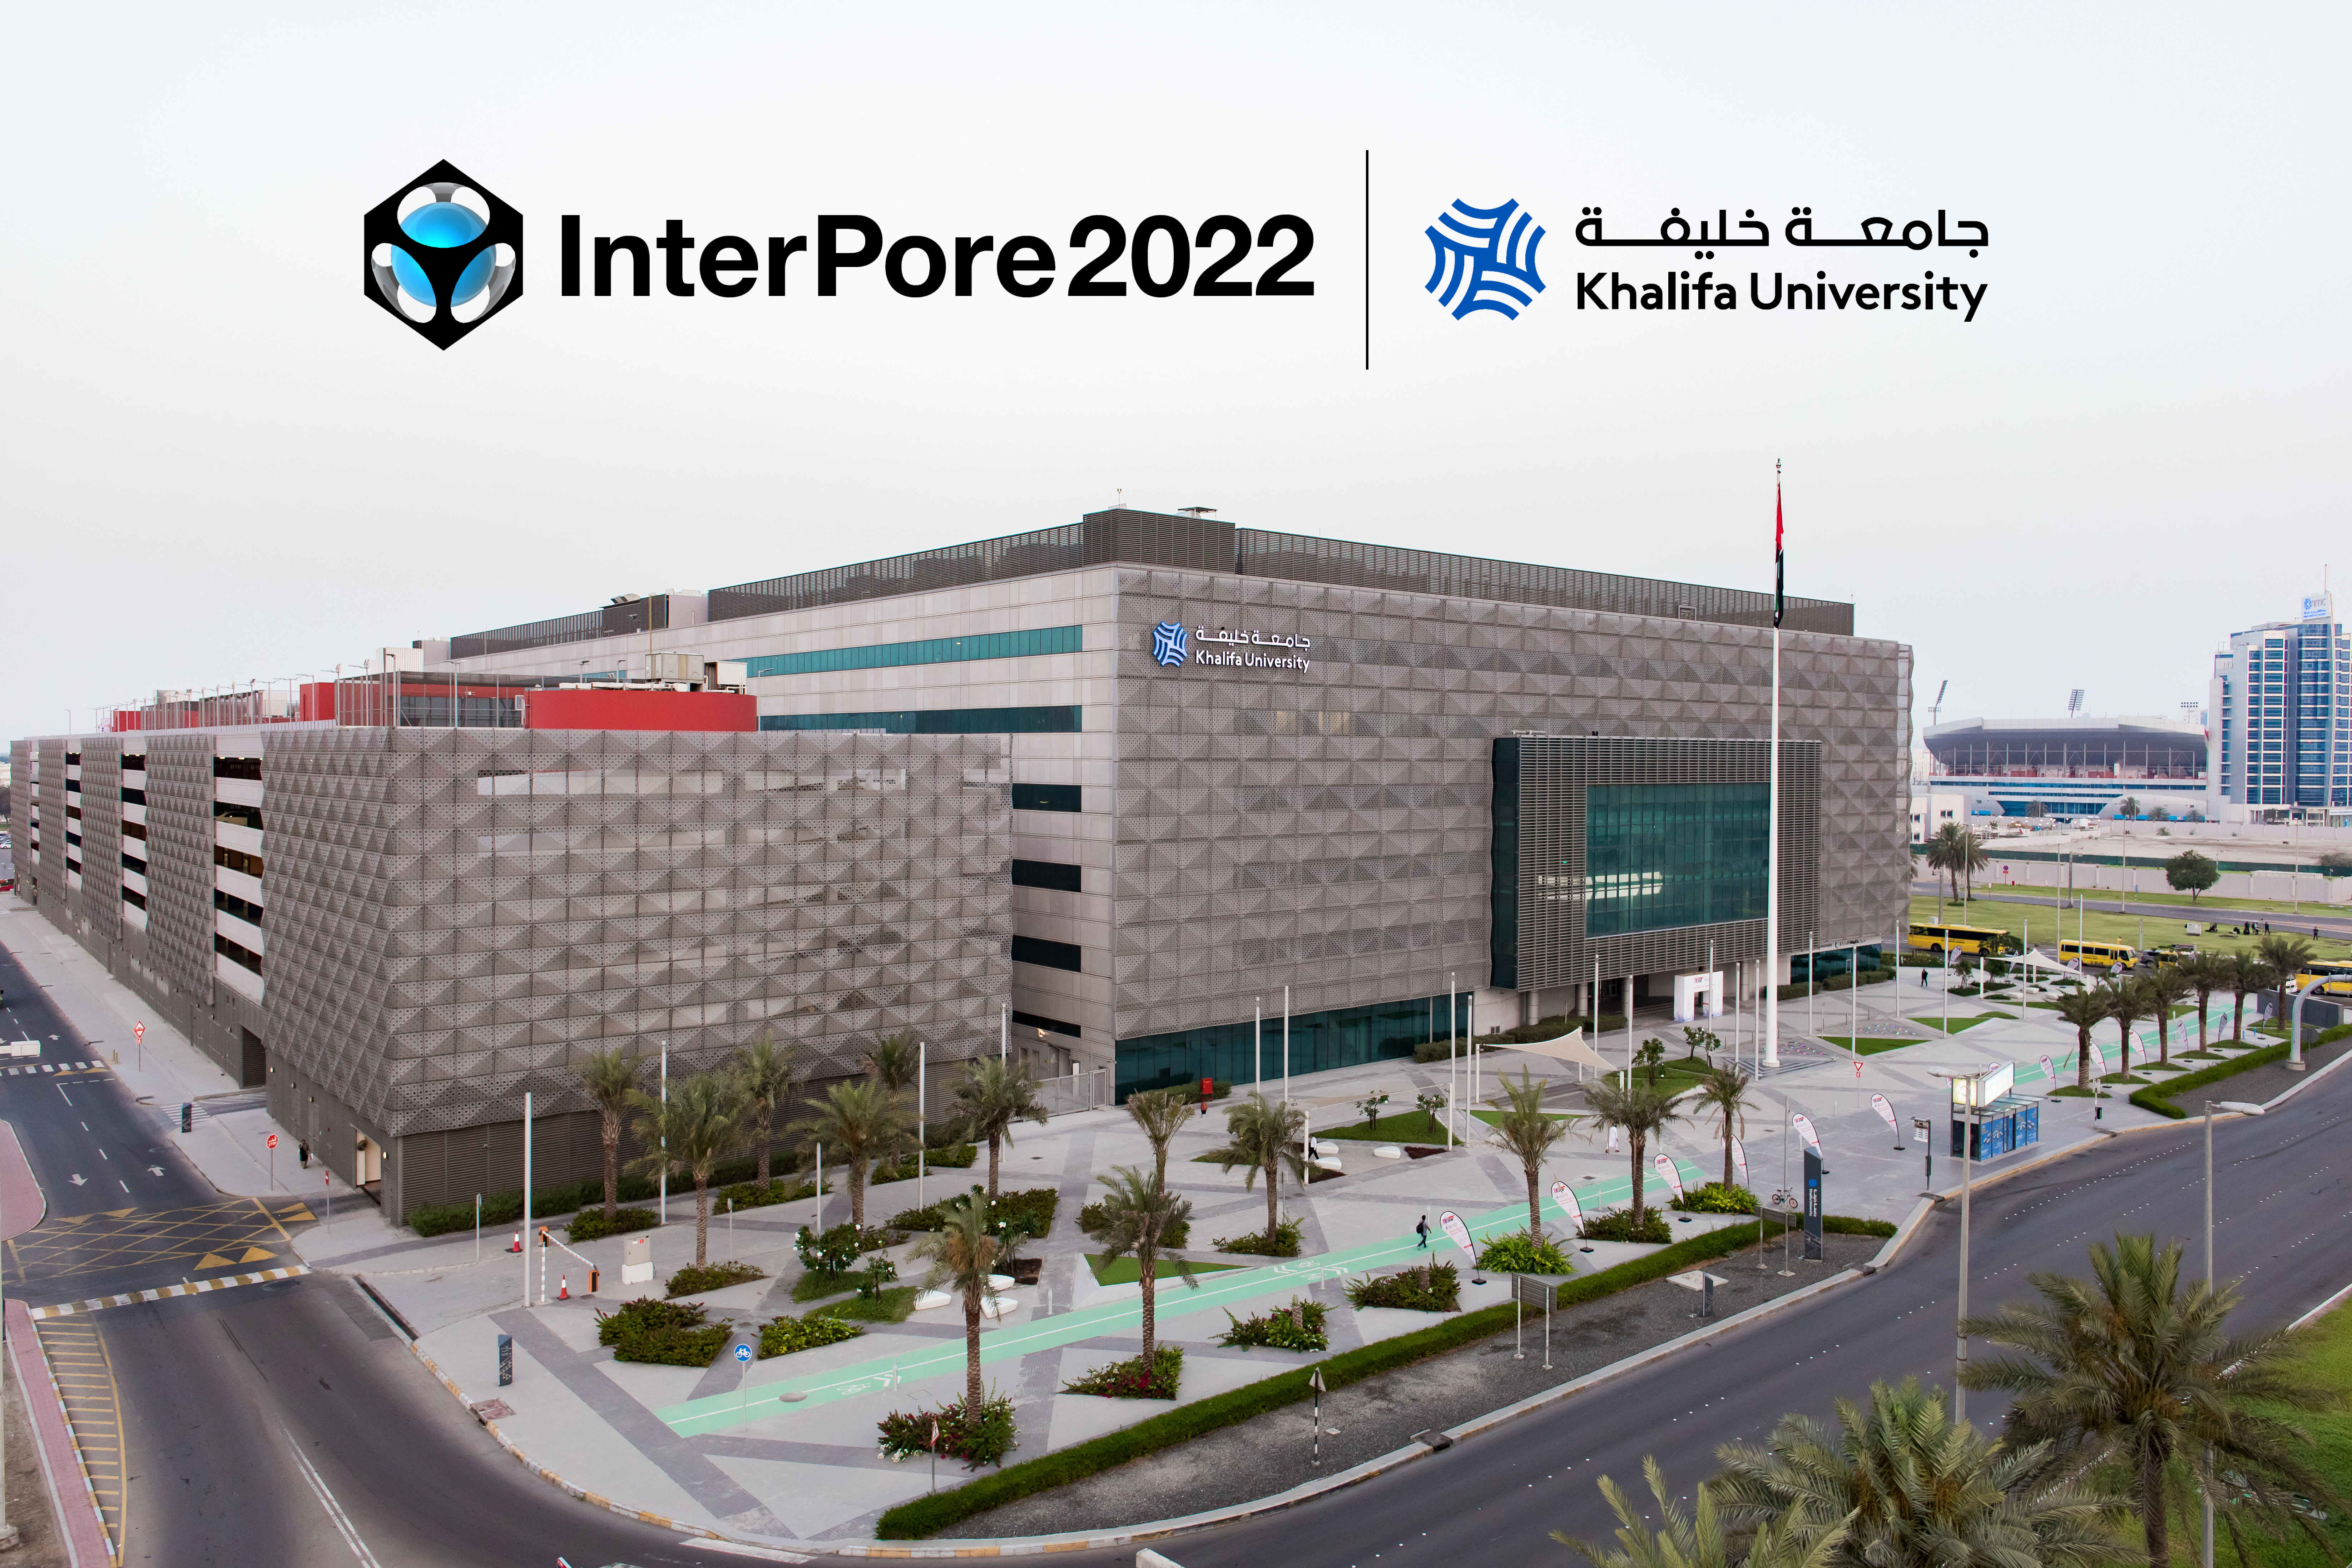 Khalifa University to Host InterPore2022 Conference in Abu Dhabi